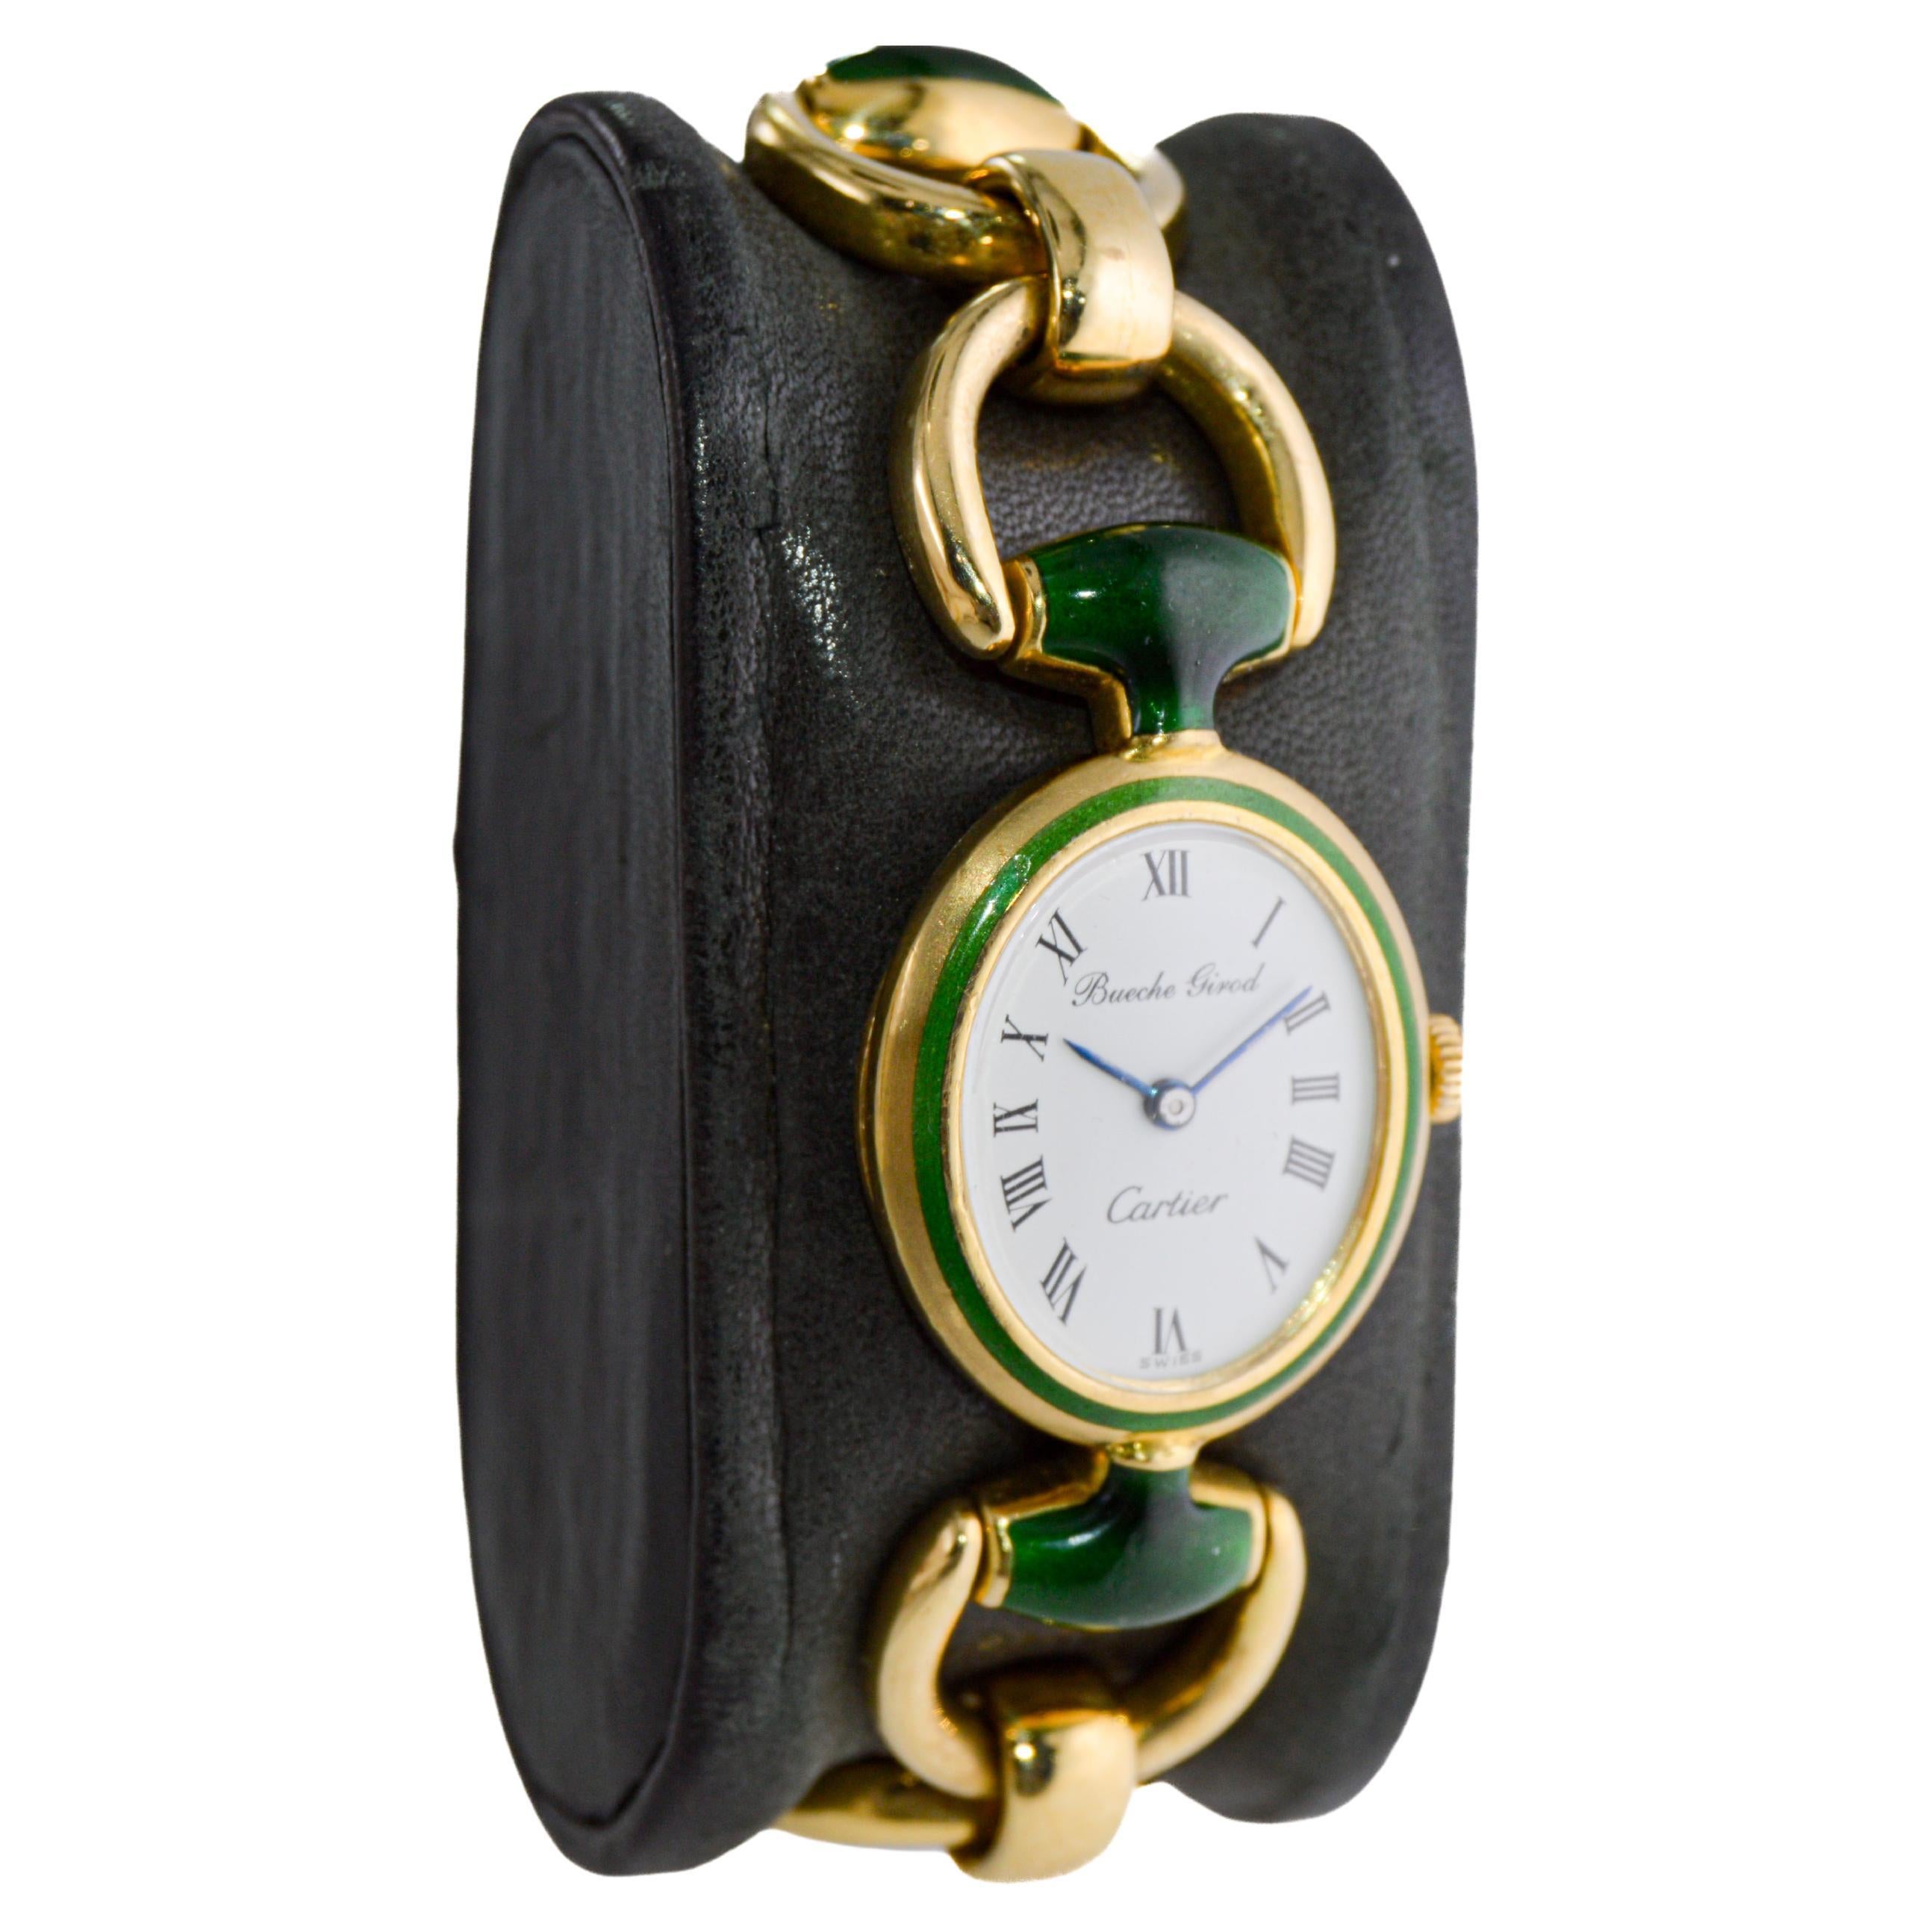 FACTORY / HOUSE: Bueche Girod for Cartier
STYLE / REFERENCE: Gold Bracelet  / Hermes Stirrup Style
METAL / MATERIAL: 18Kt. Solid Yellow Gold and Kiln Fired Enamel Links
CIRCA: 1970's
DIMENSIONS: Length 41mm X Diameter 23mm
MOVEMENT / CALIBER: Manual